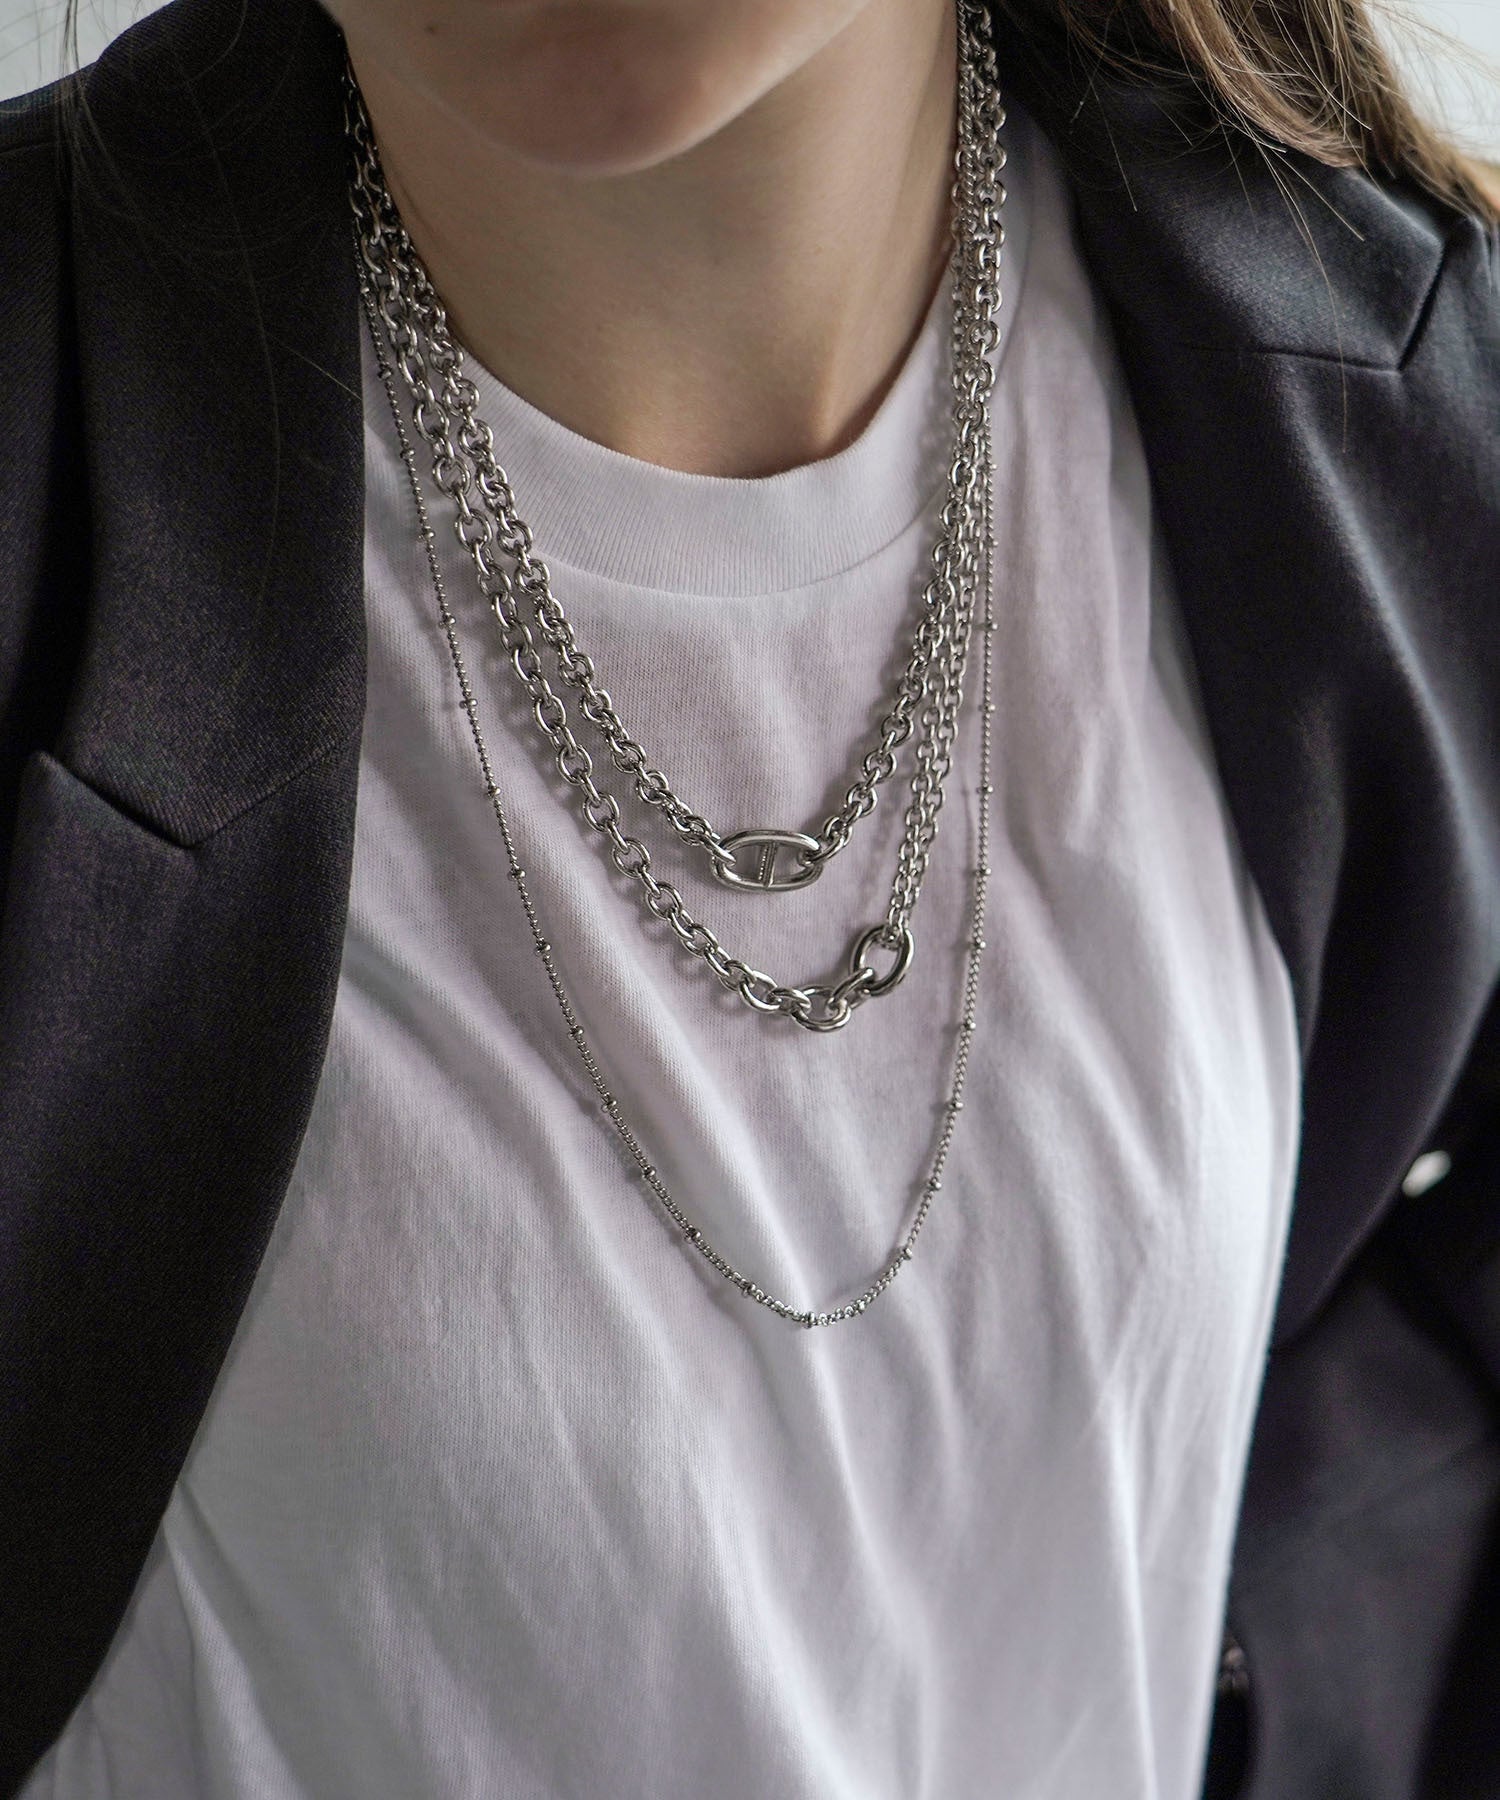 ital. from JUNRed / dot necklace | JUNRed